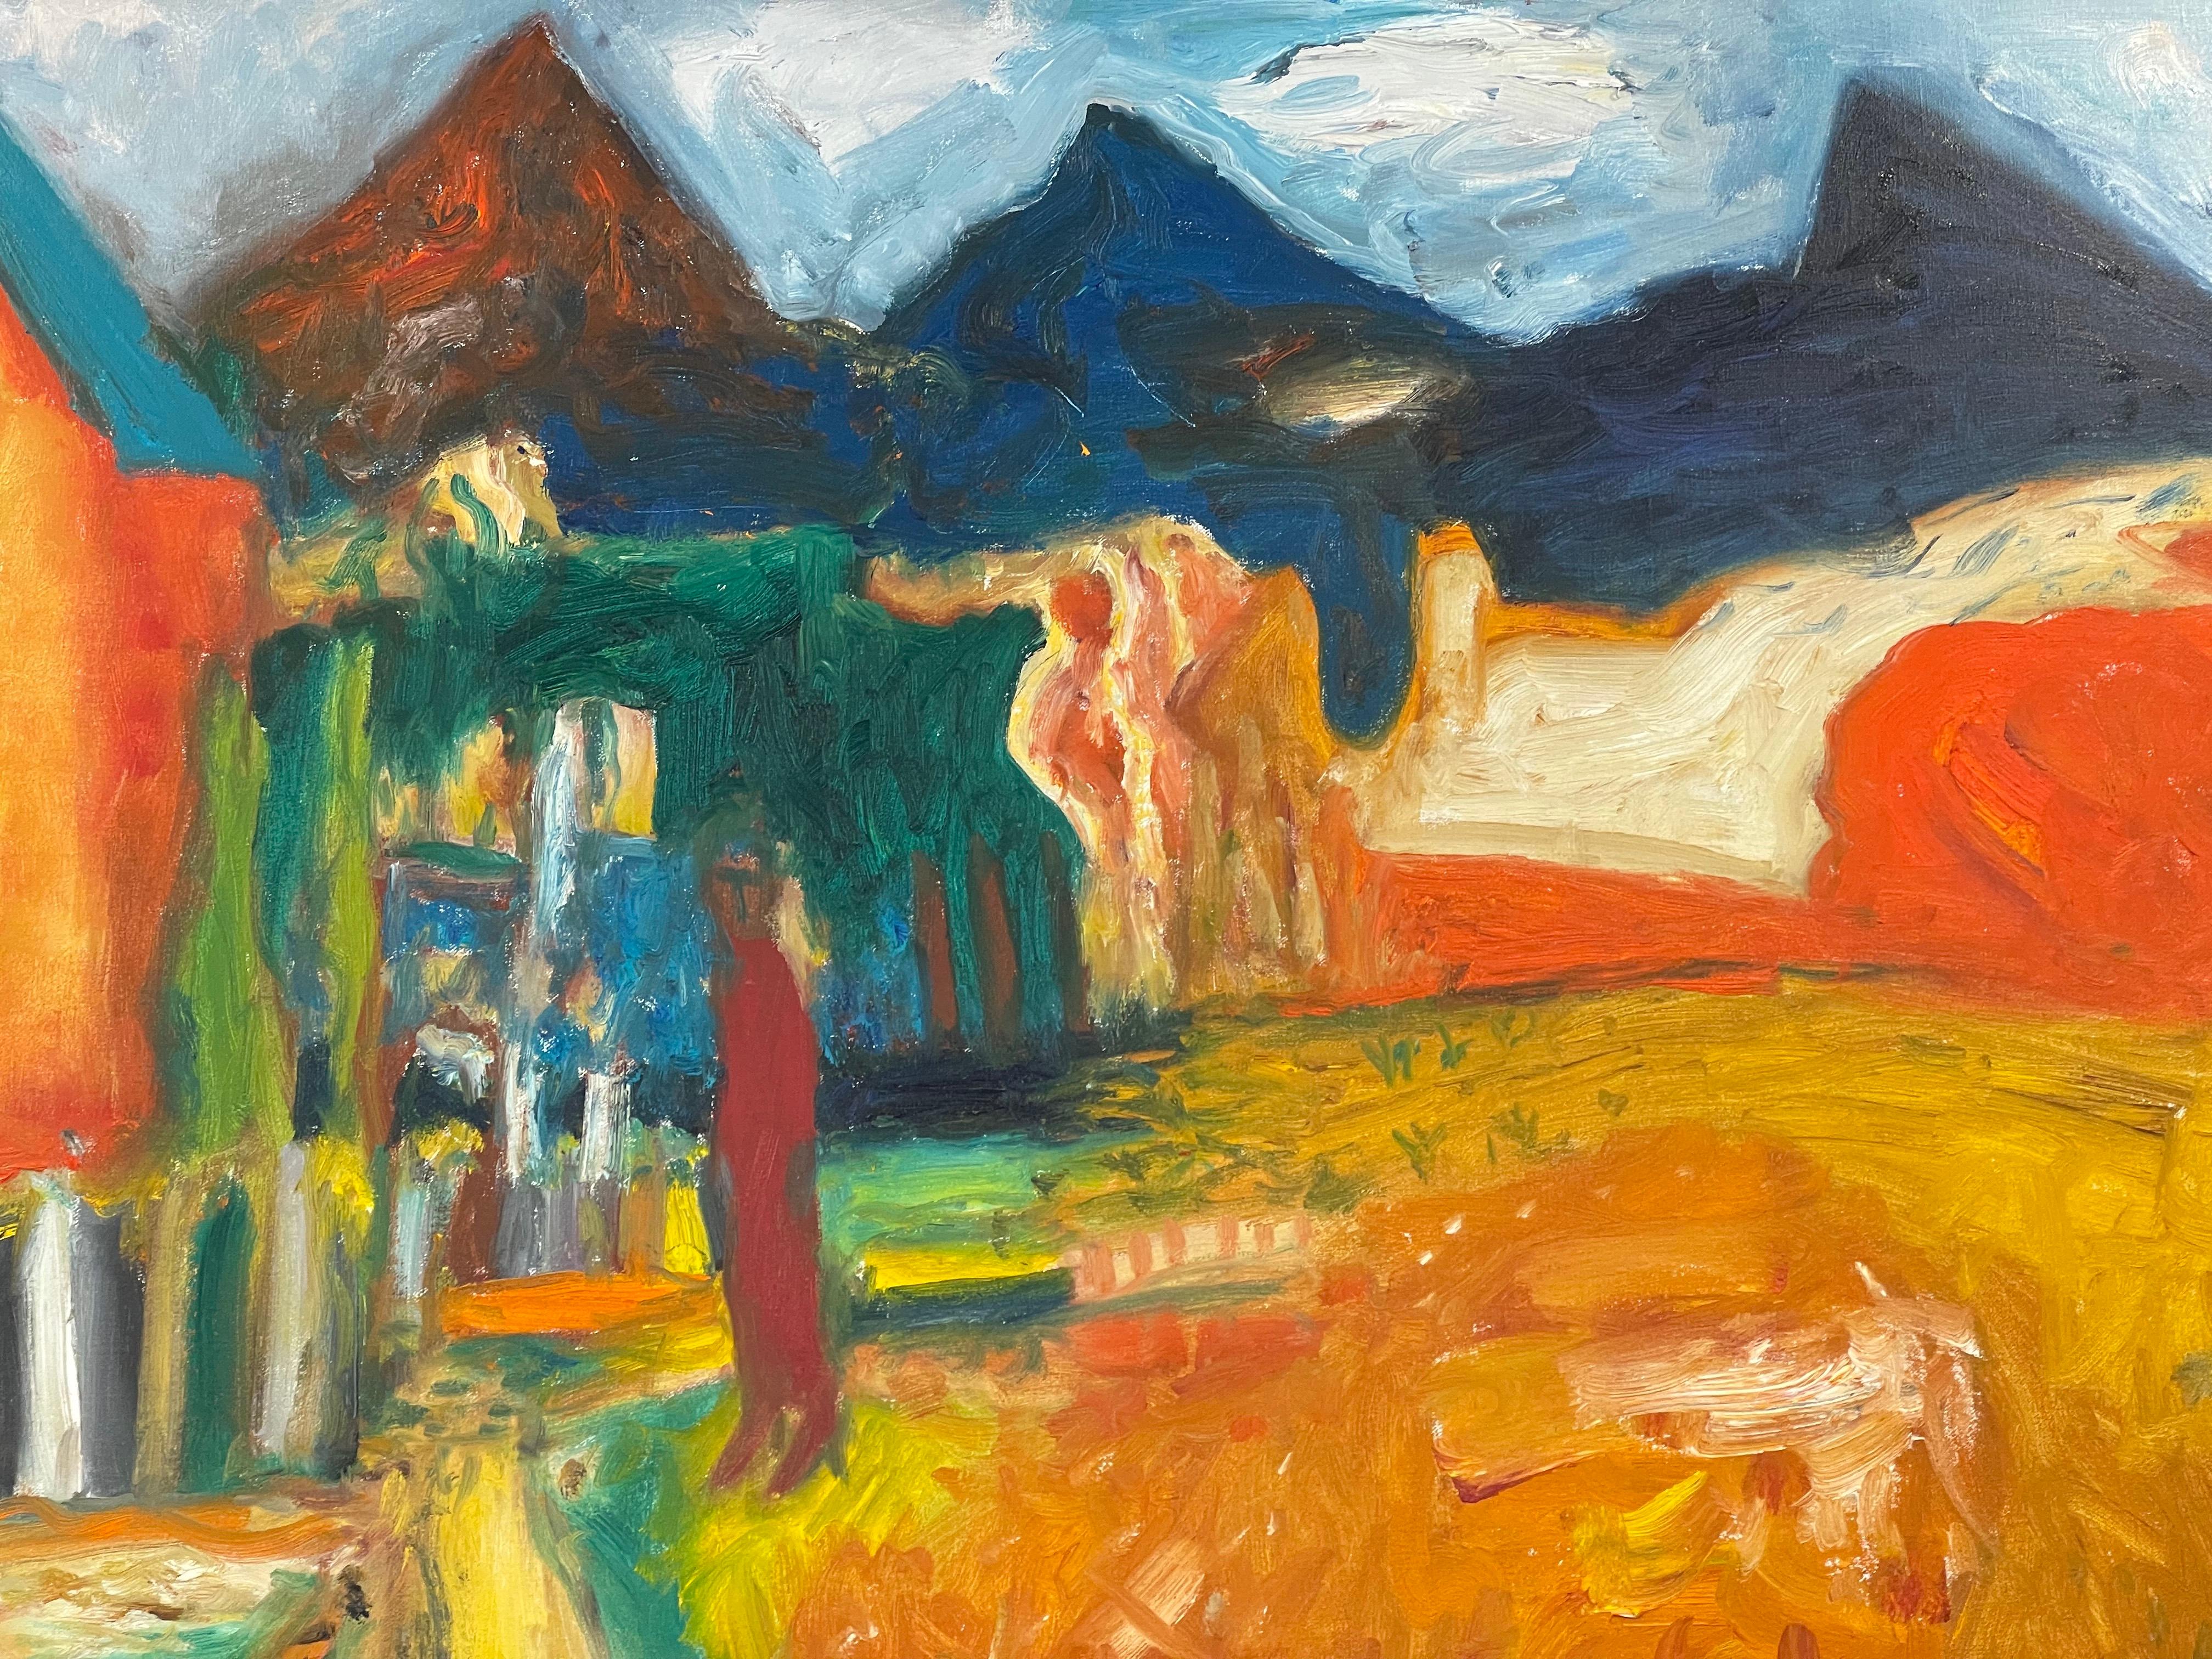 John Bellany was an influential Scottish painter. Credited with pioneering a style of painting that melded the influences of Impressionism with Naive painting, Bellany’s work explored endemically Scottish symbolism and histories. 